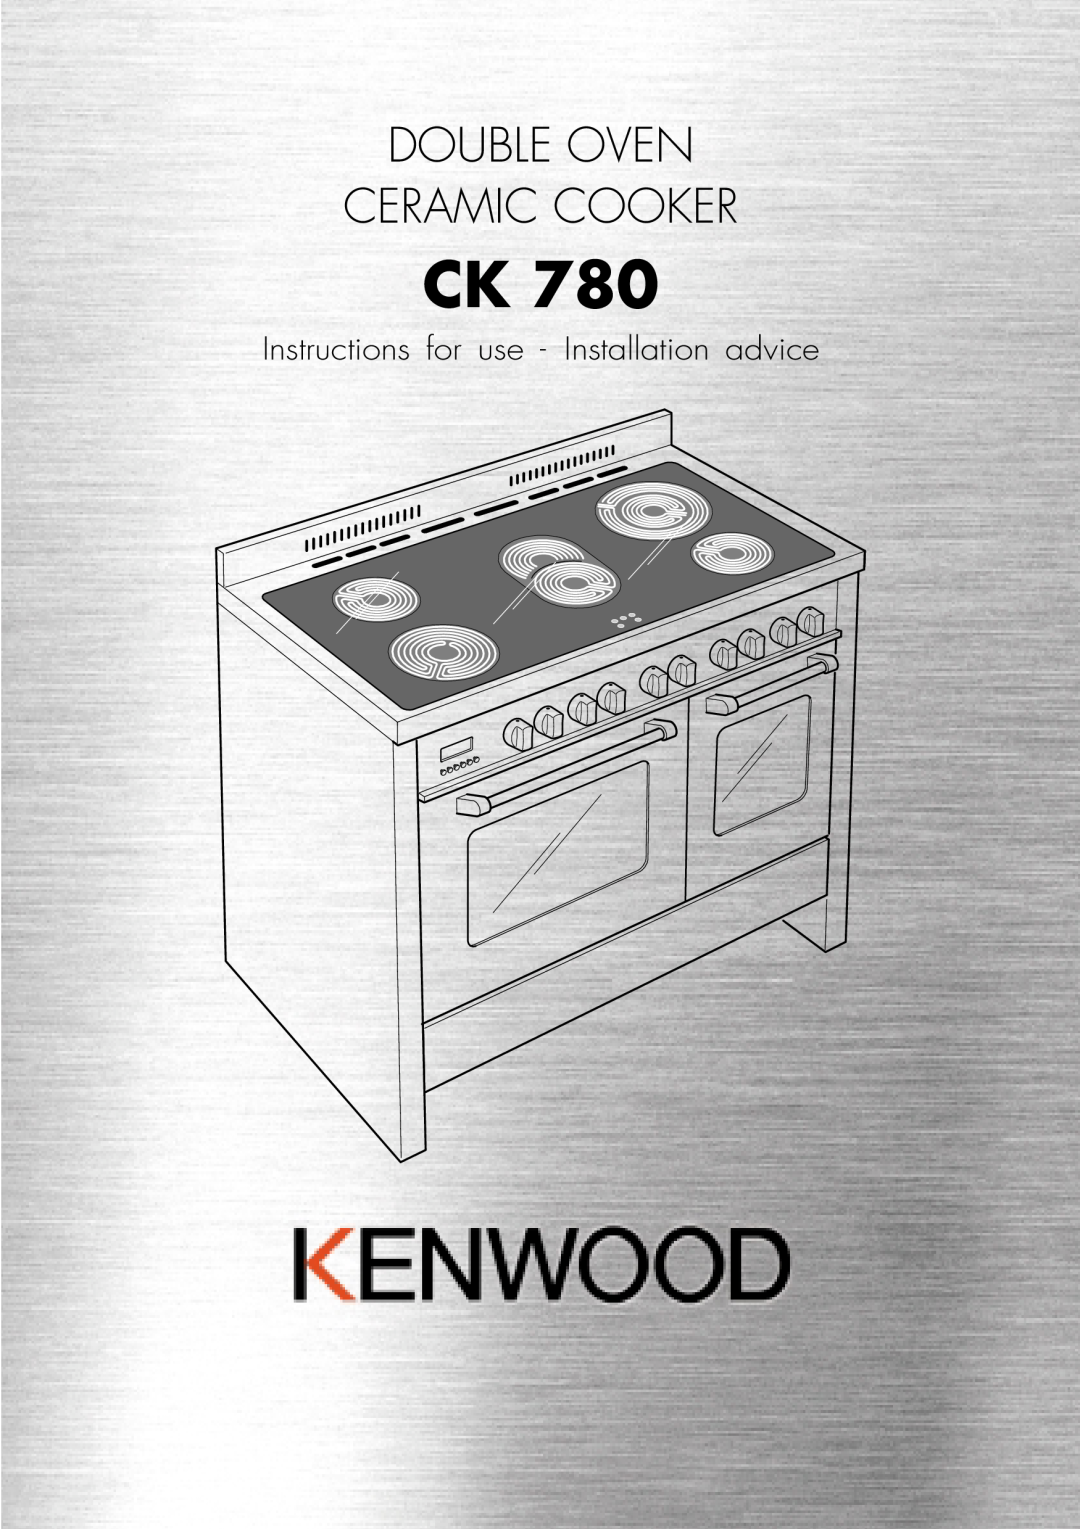 Kenwood CK 780 manual Double Oven Ceramic Cooker, Instructions for use - Installation advice 